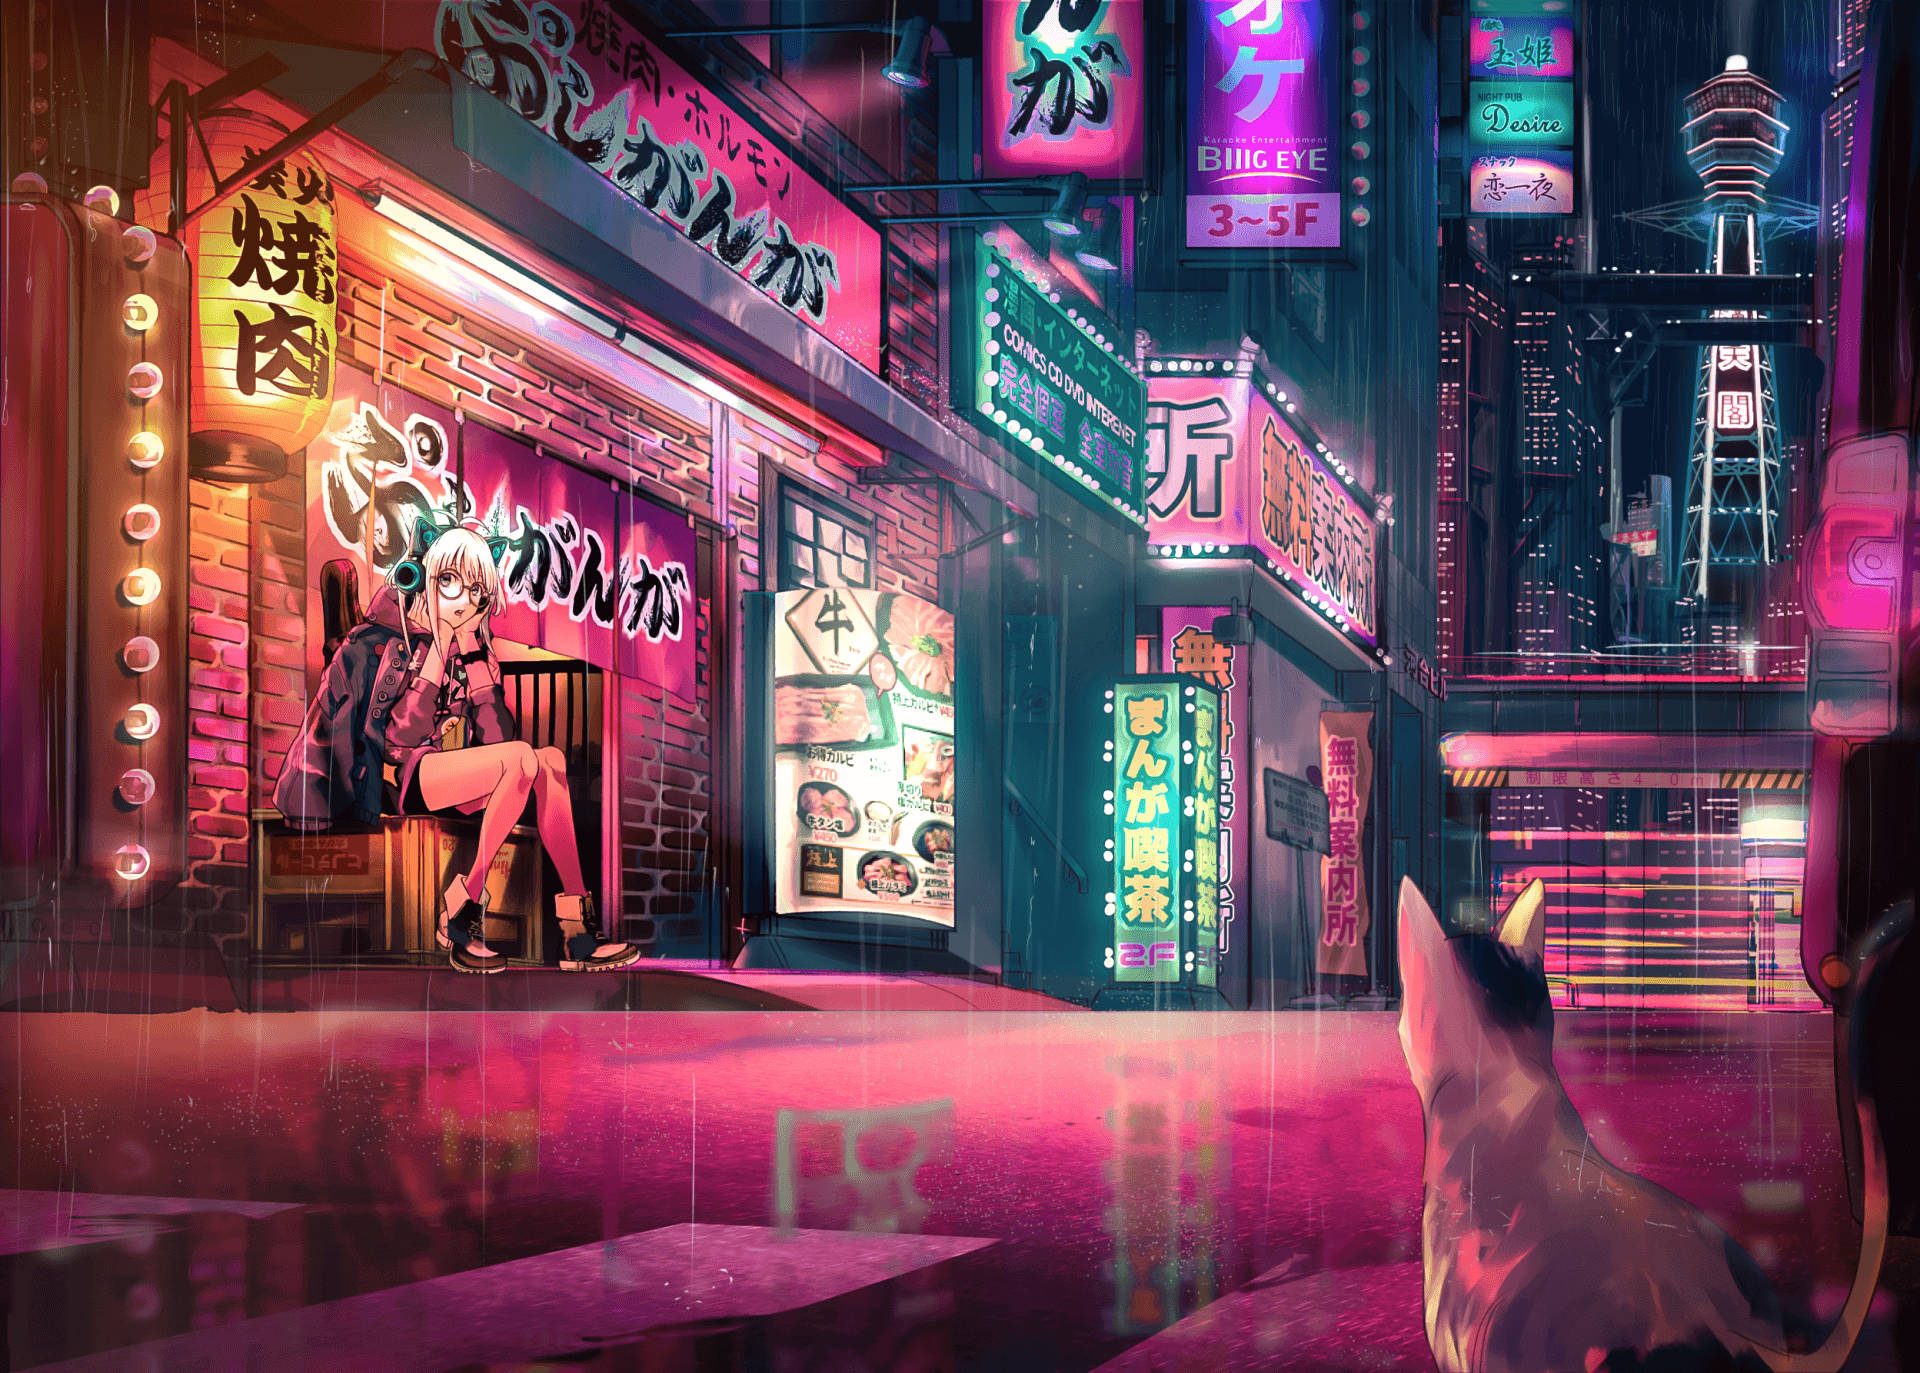 Make your way through the majestic Anime Night City Wallpaper